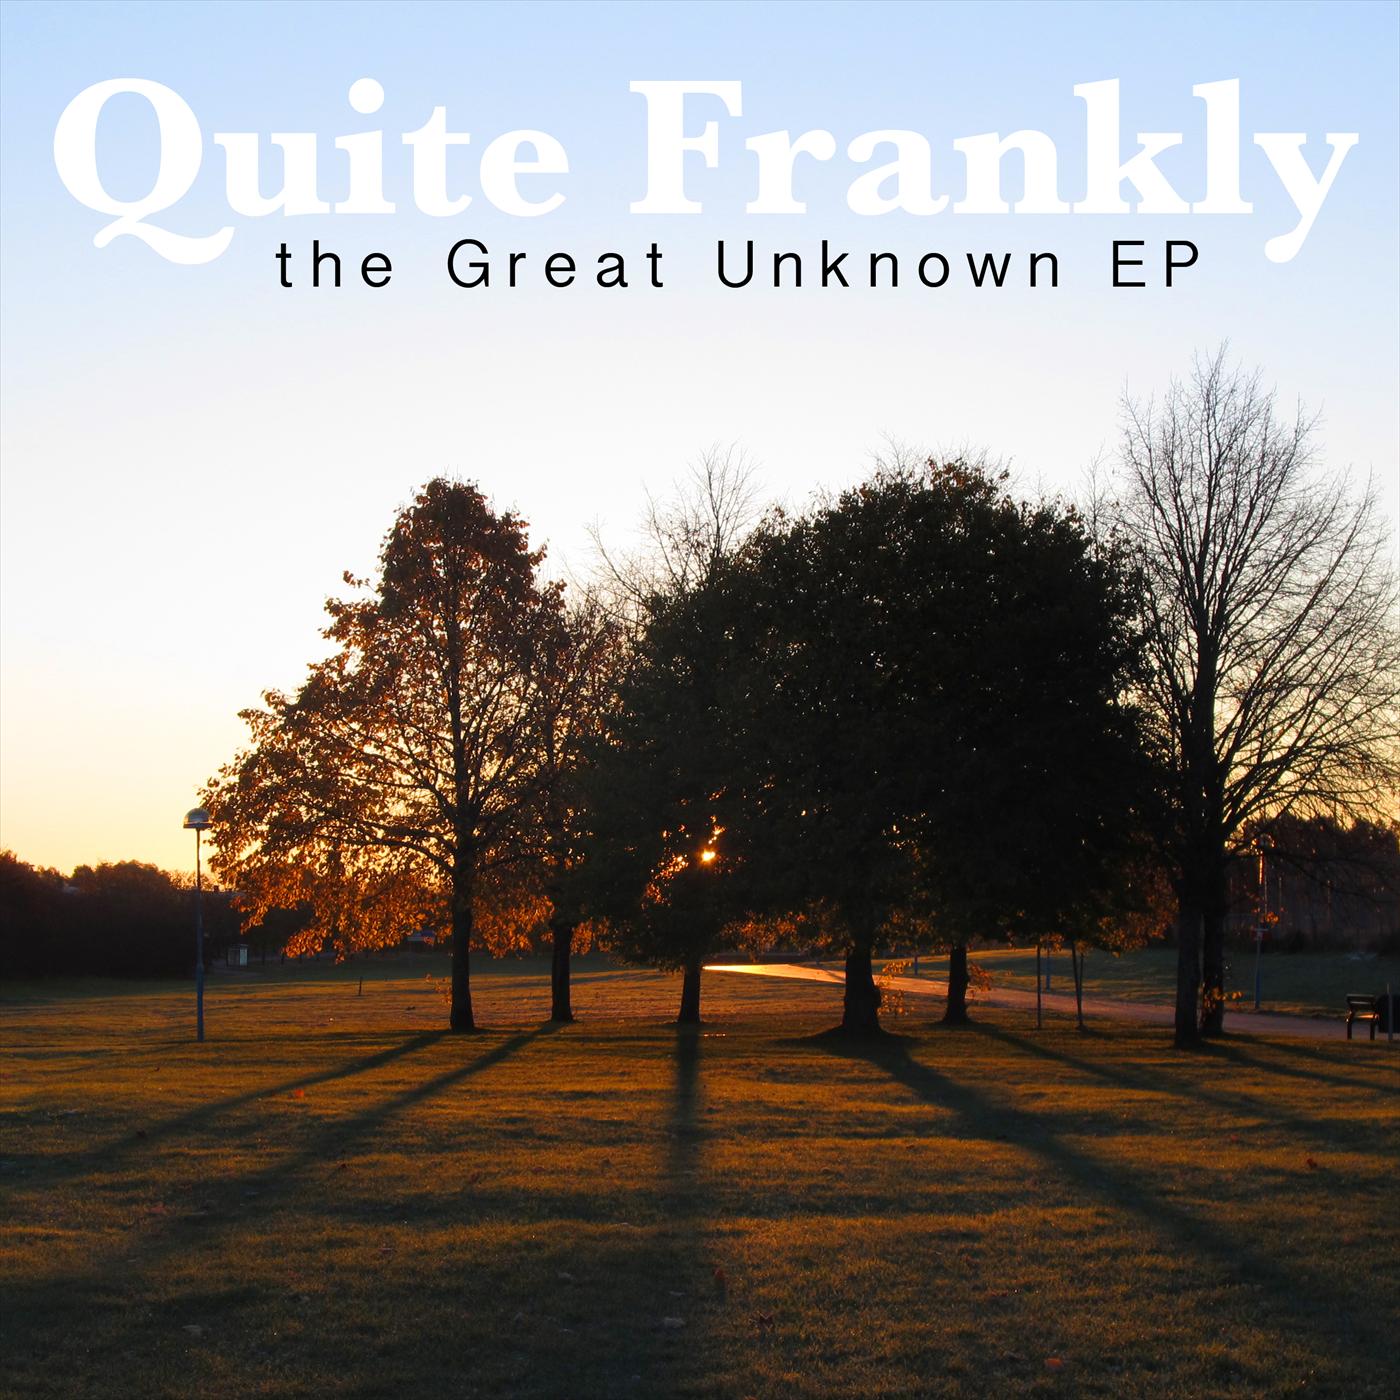 the Great Unknown EP